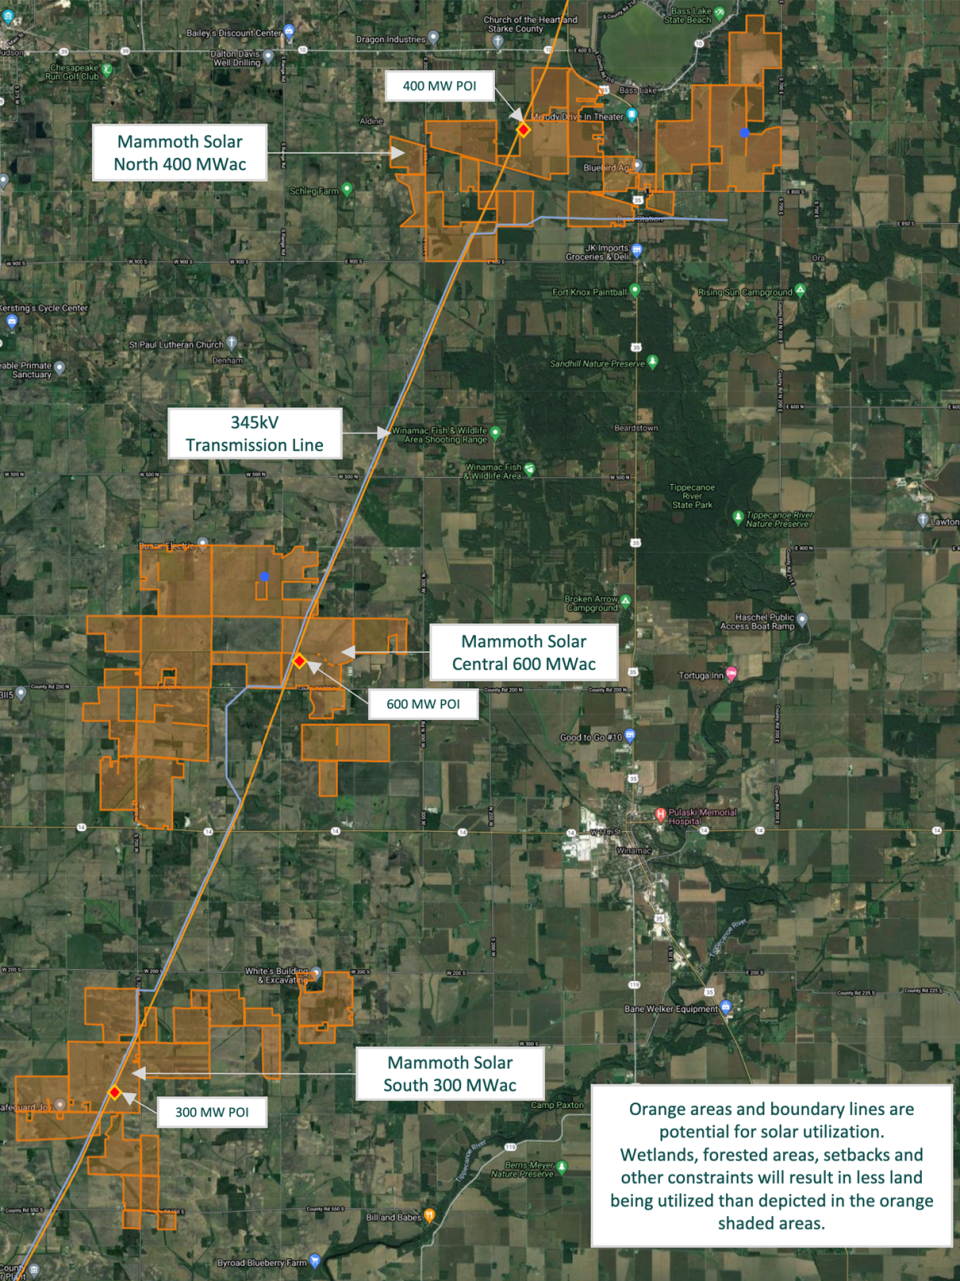 The map shows the three different phases of the Mammoth Solar project in Starke and Pulaski Counties, as well as the transmission lines that run through the project sites. The orange areas represent the roughly 13,000 acres that will be part of the project, but only about 2,500 acres will have panels on them after accounting for forests, wetlands, setbacks, etc.